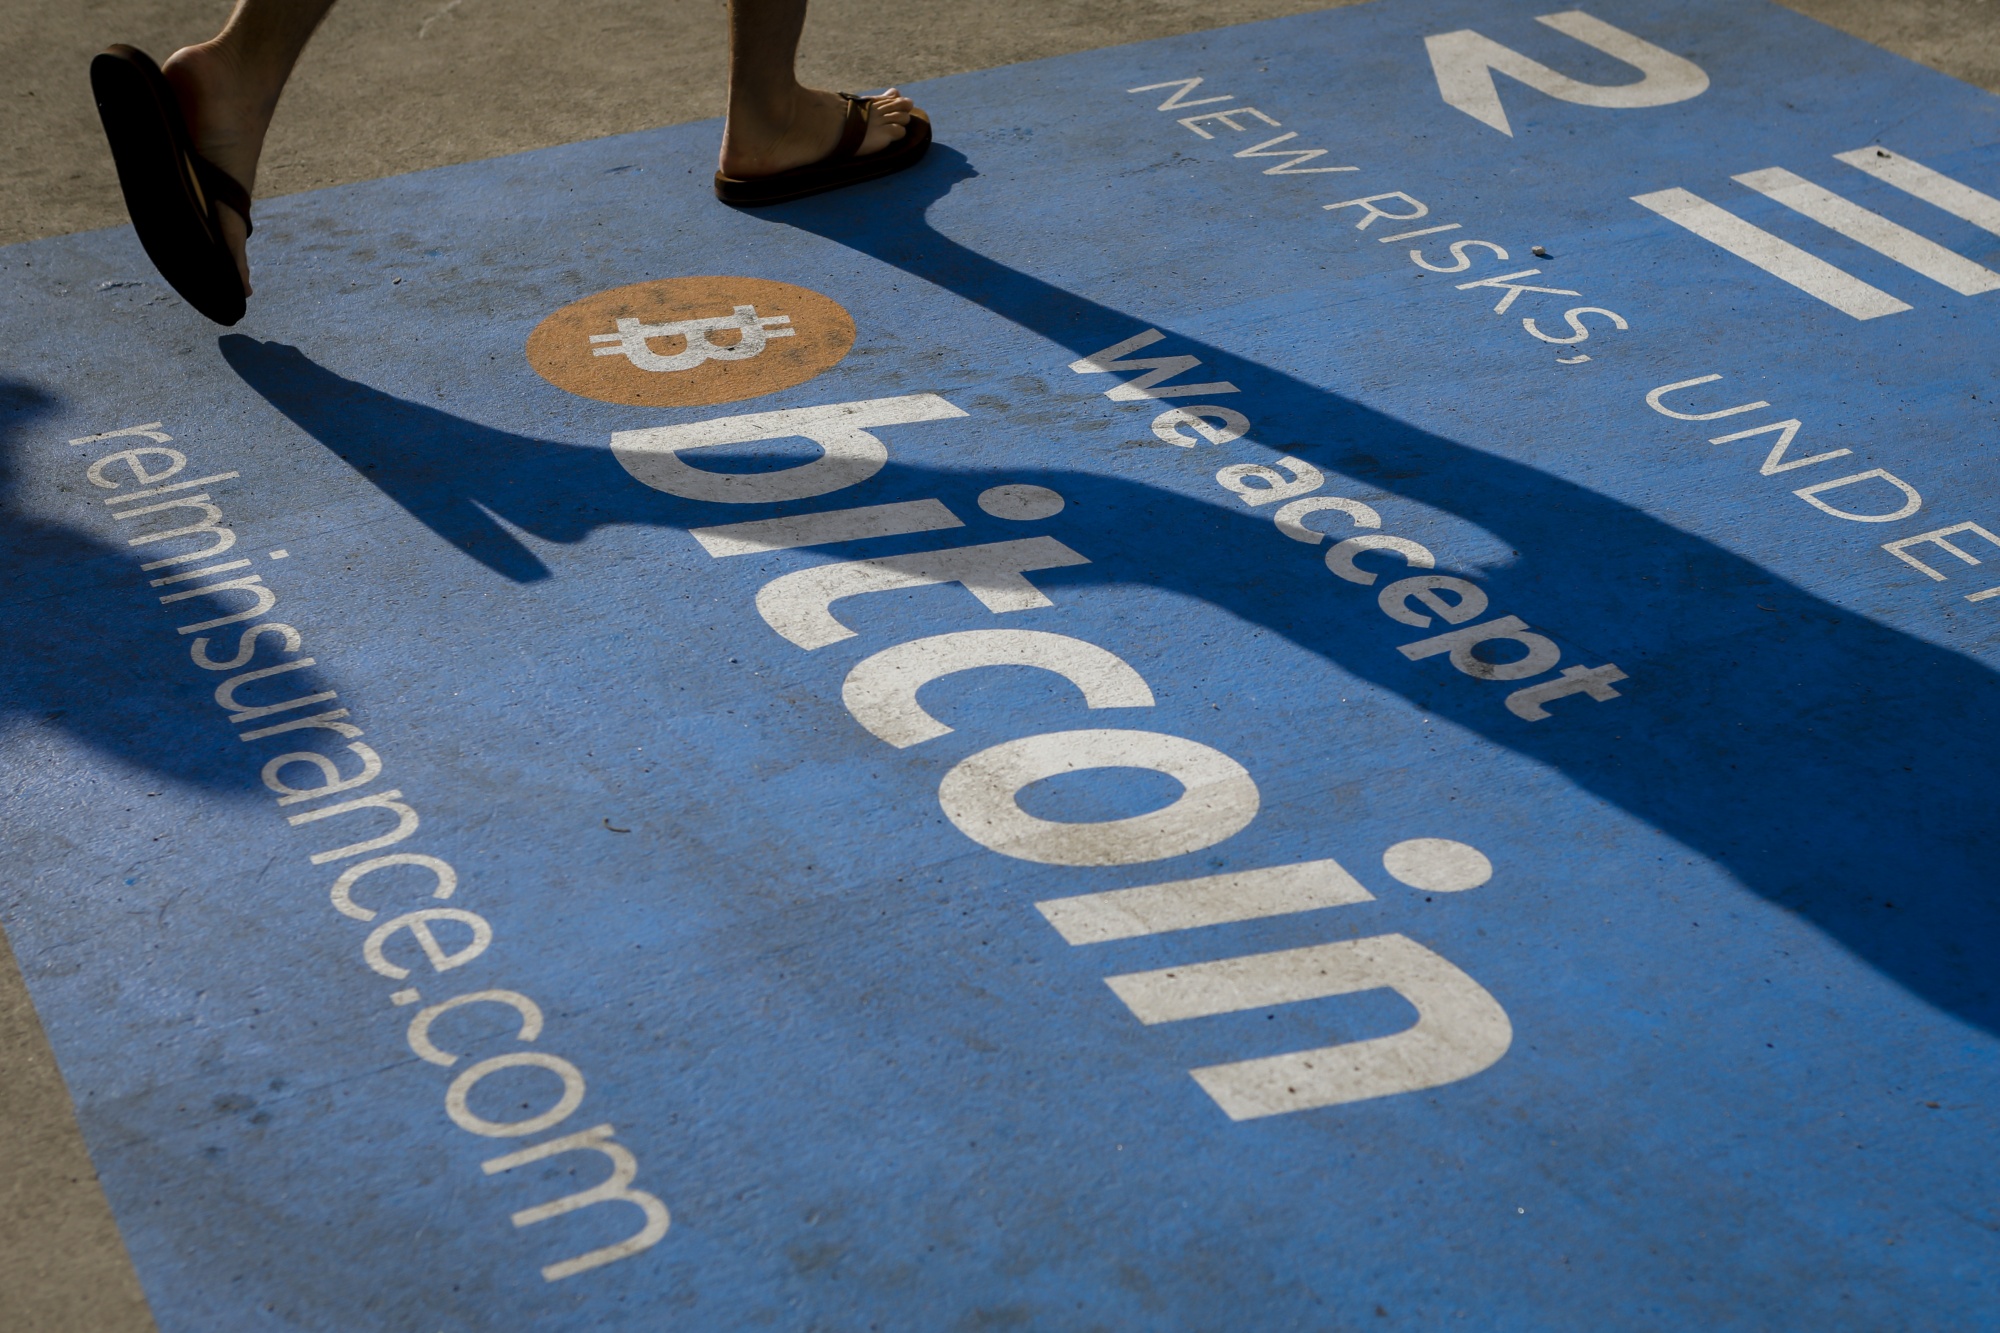 Bitcoin signage during the Bitcoin 2021 conference in Miami on June 5.